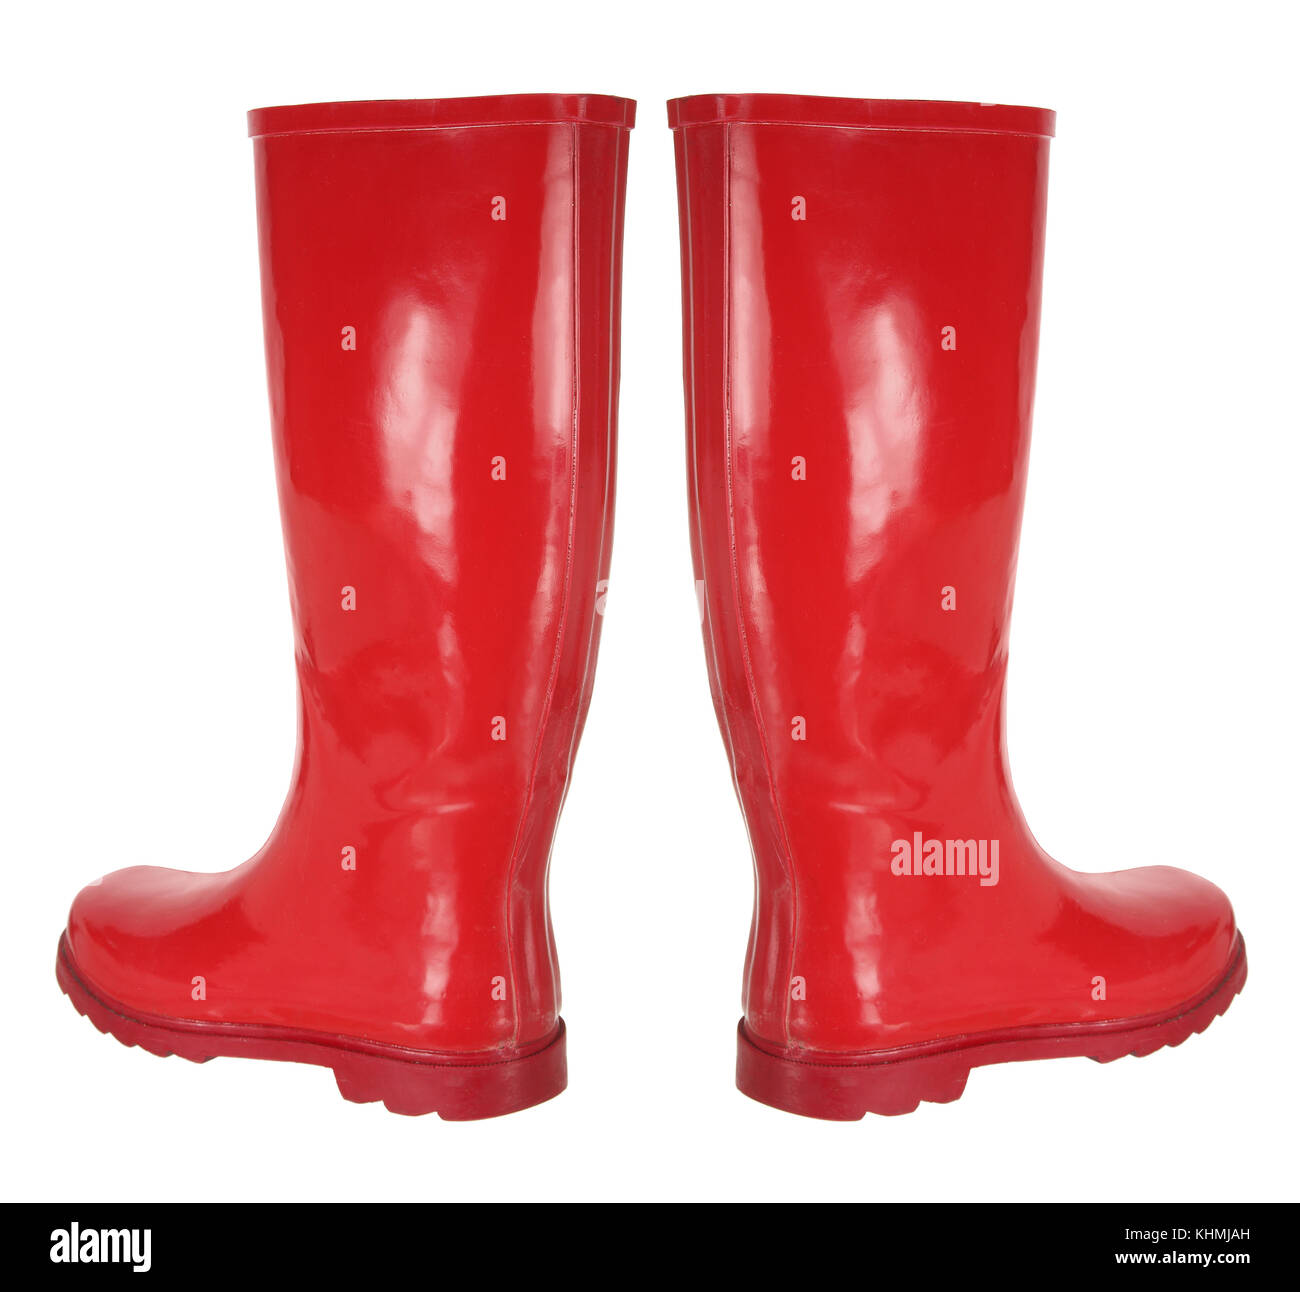 Red Rubber Boots on White Background Stock Photo